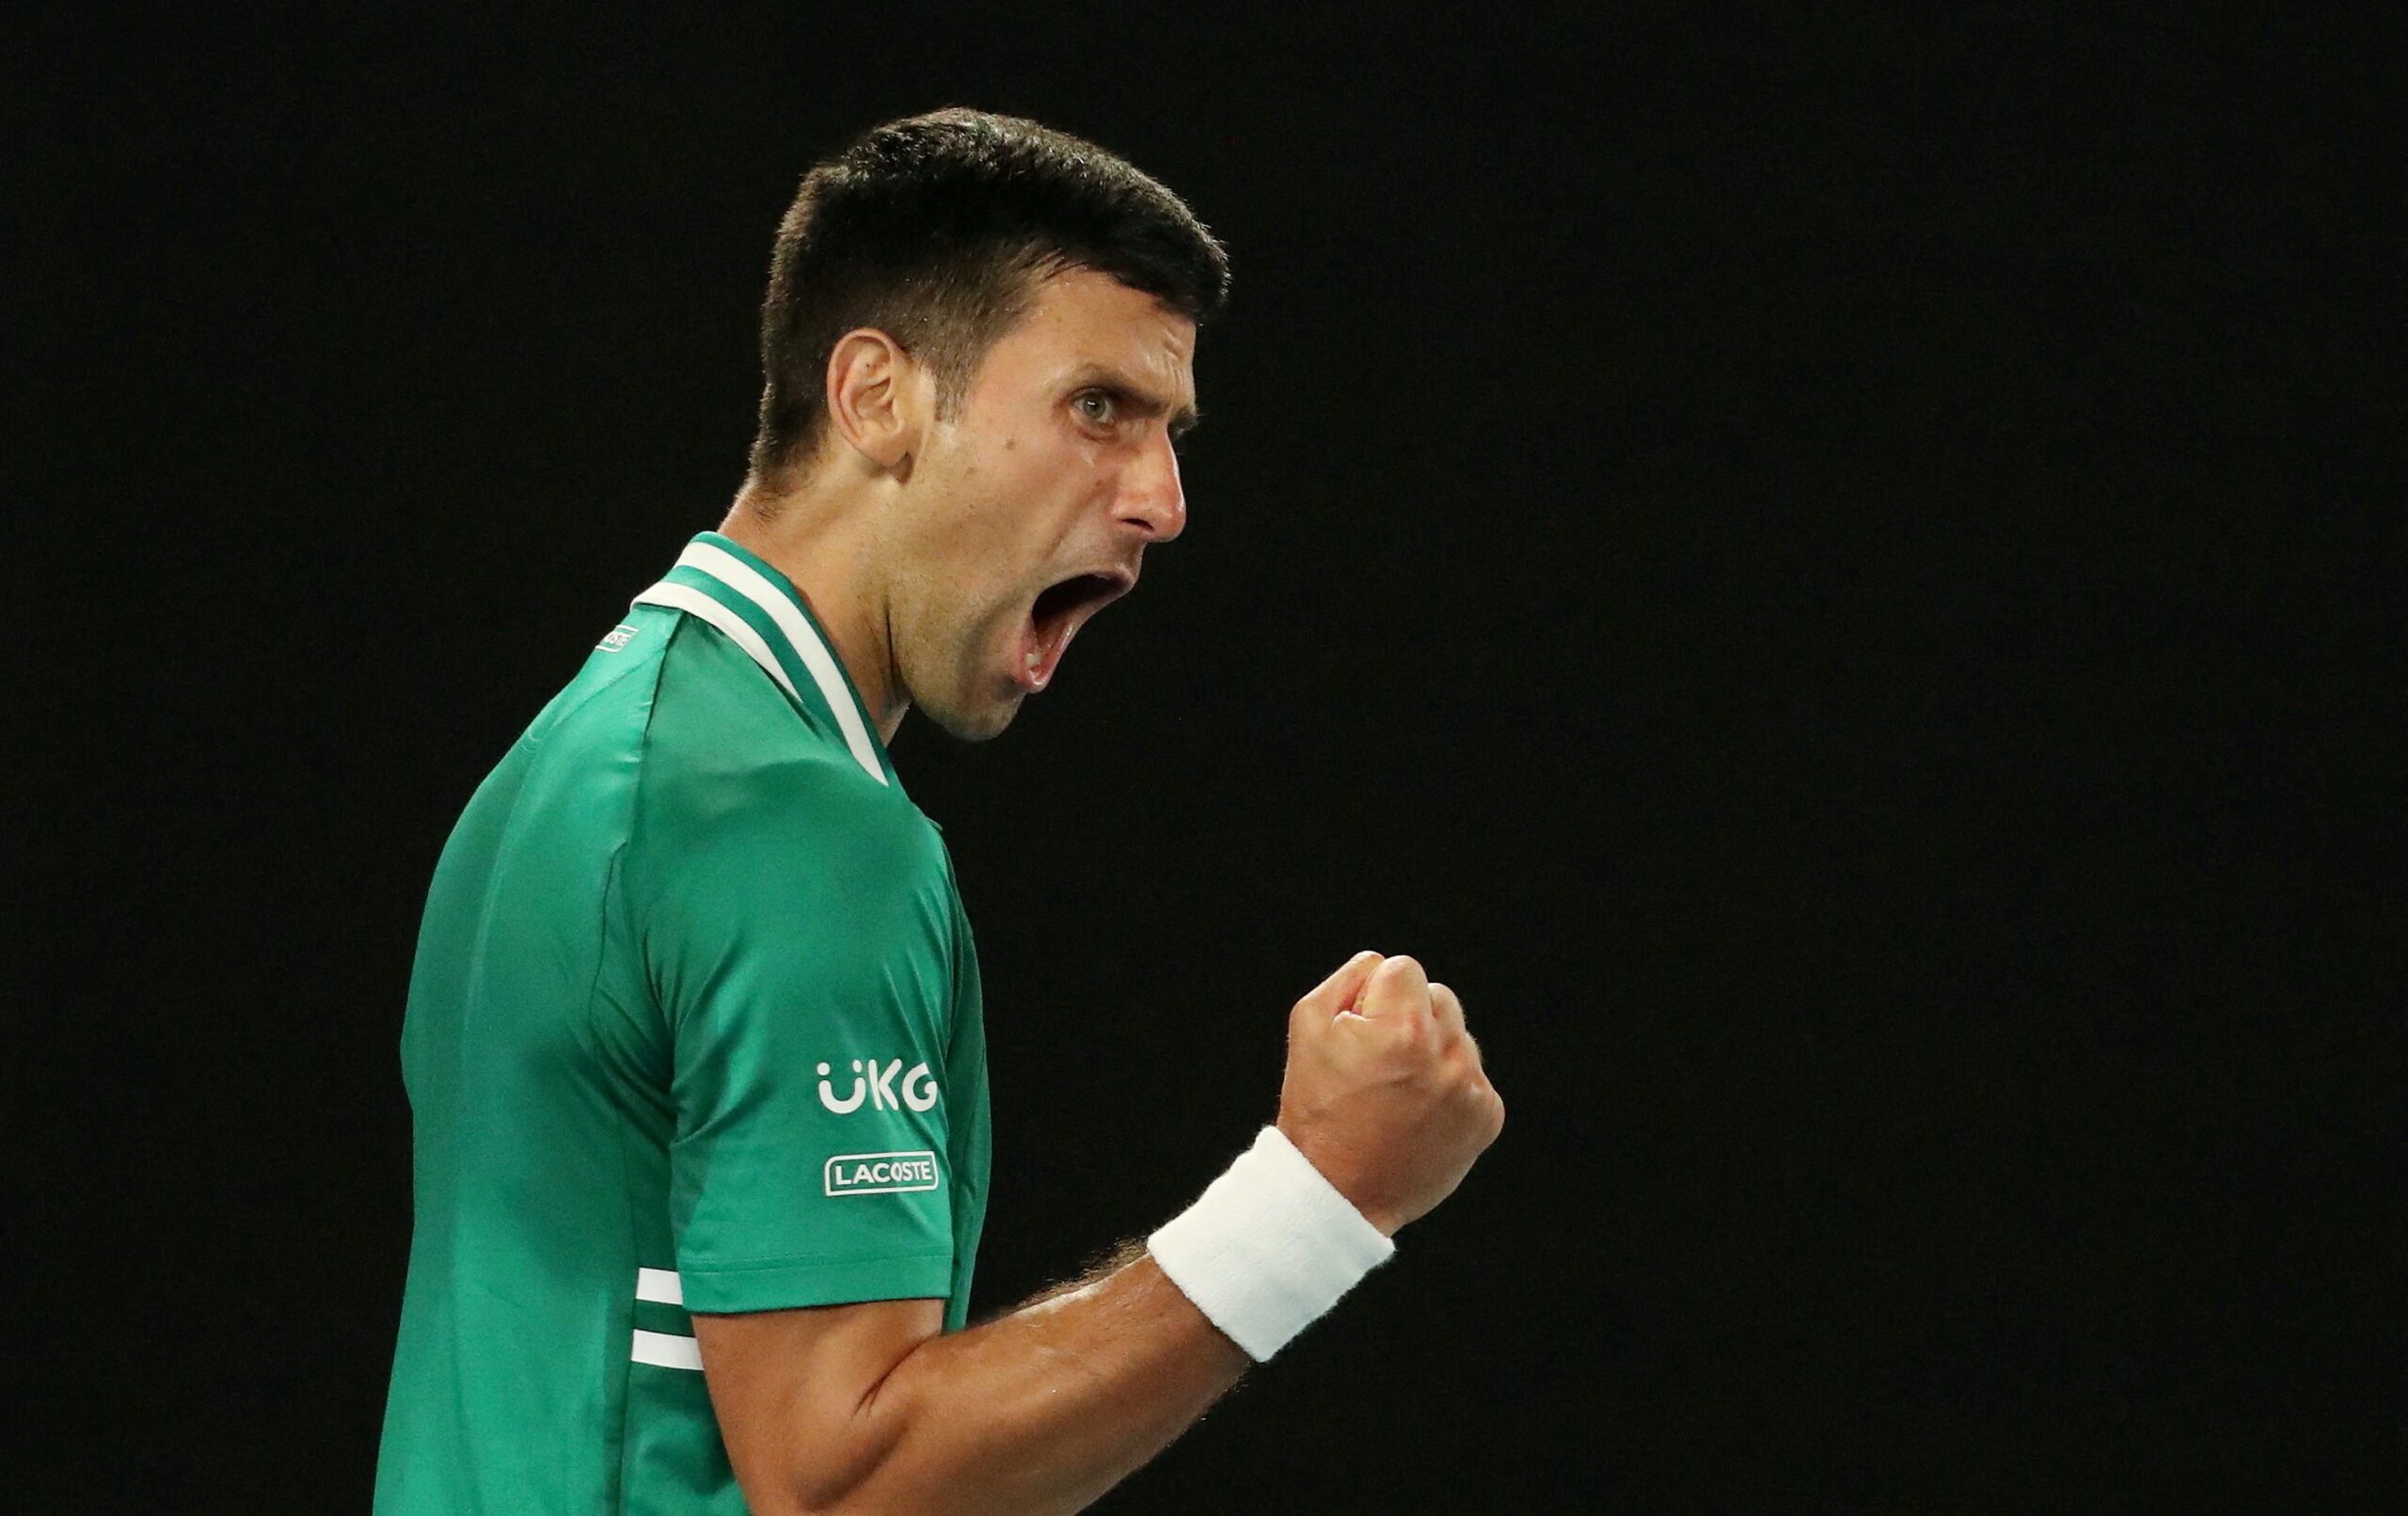 Novak Djokovic has long divided opinion. Now, his legacy will be complicated even further